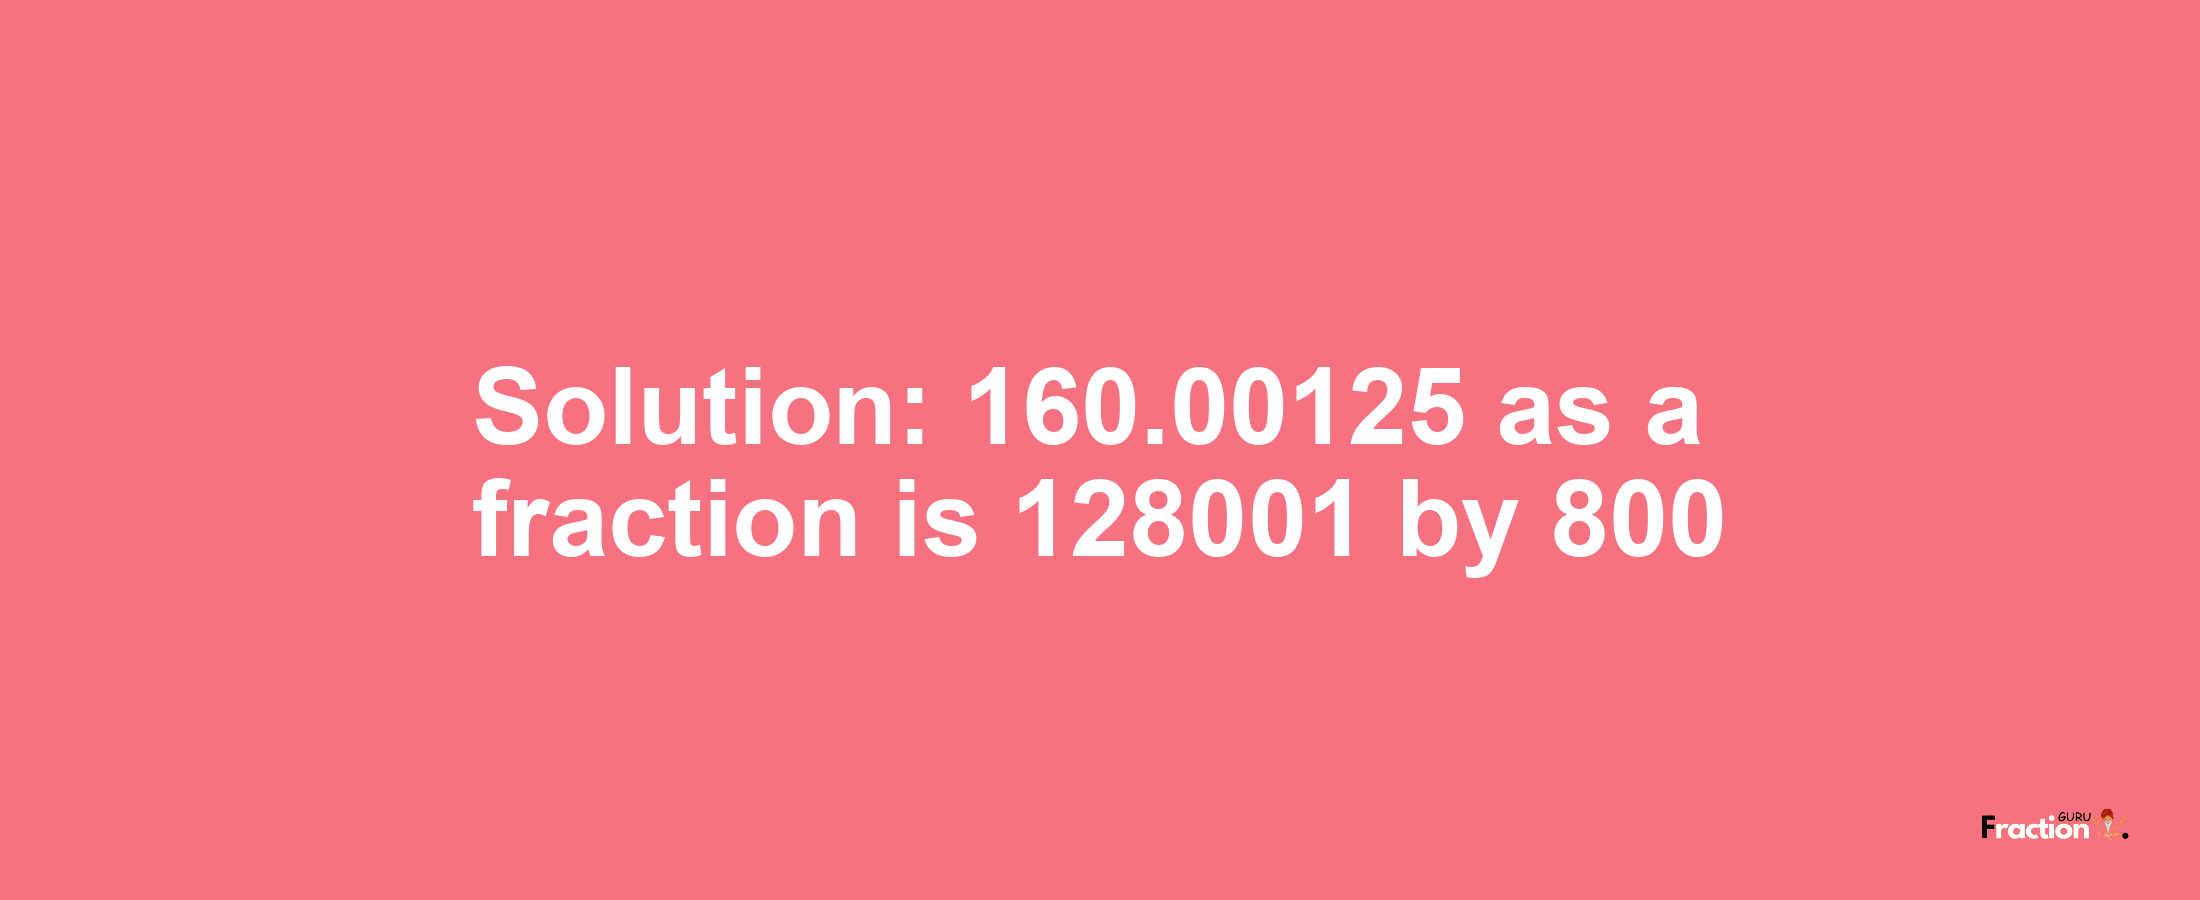 Solution:160.00125 as a fraction is 128001/800